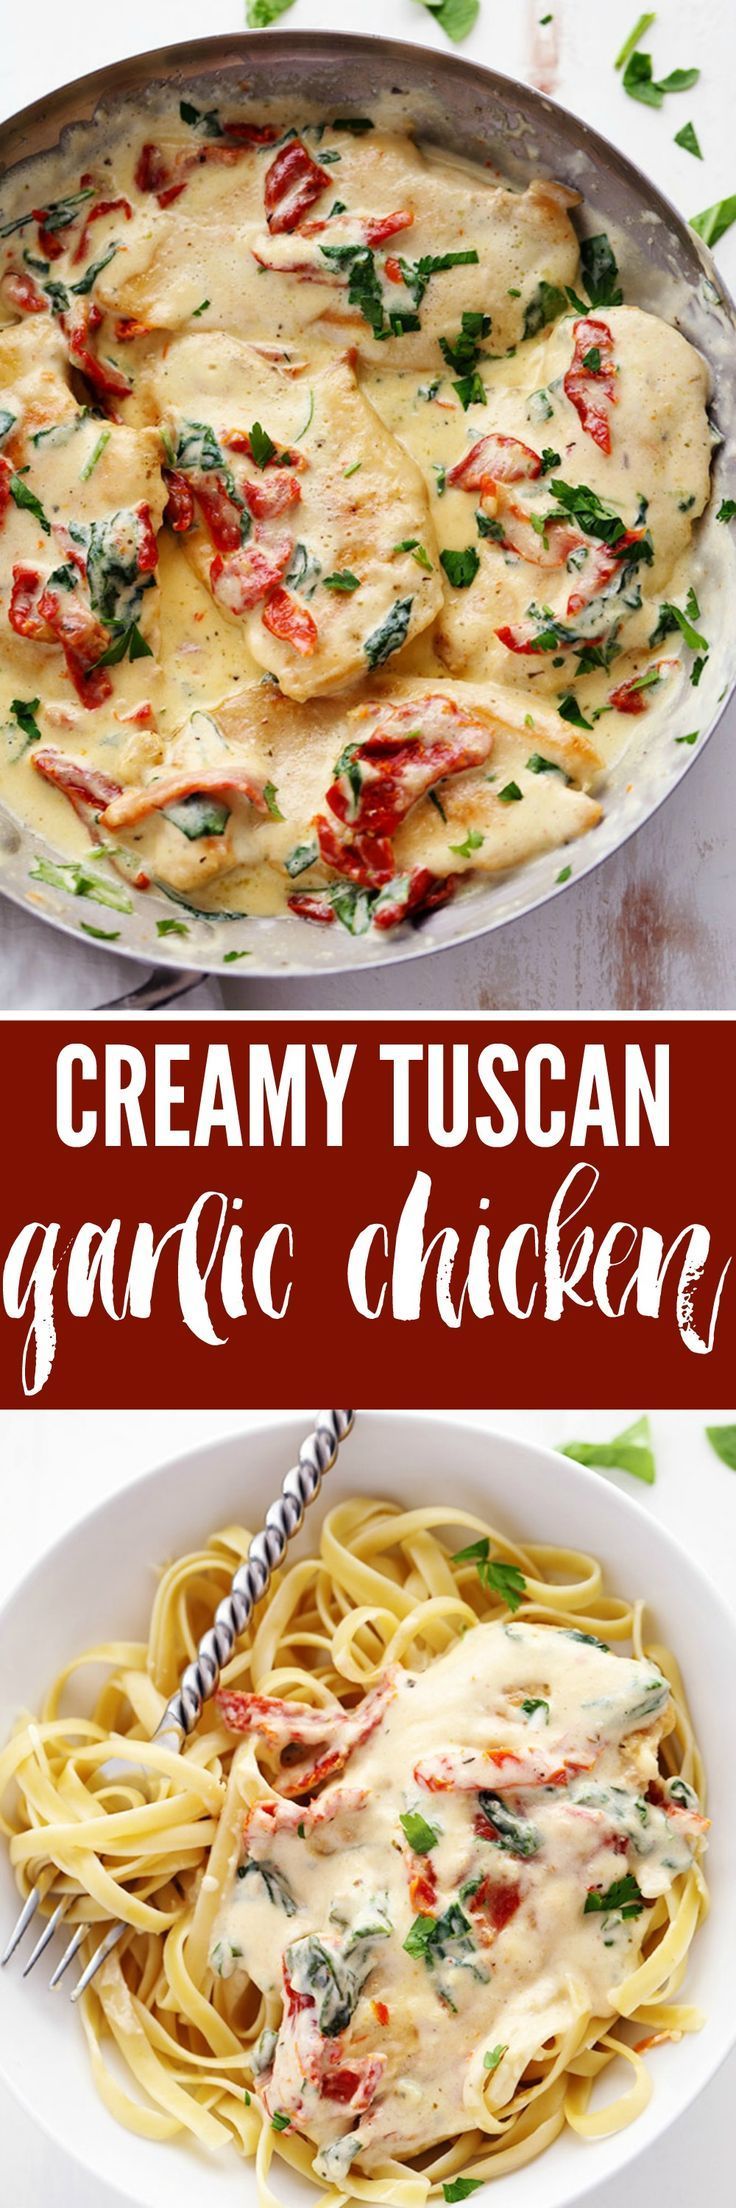 Creamy Tuscan Garlic Chicken has the most amazing creamy garlic sauce with spinach and sun dried tomatoes. This meal is a